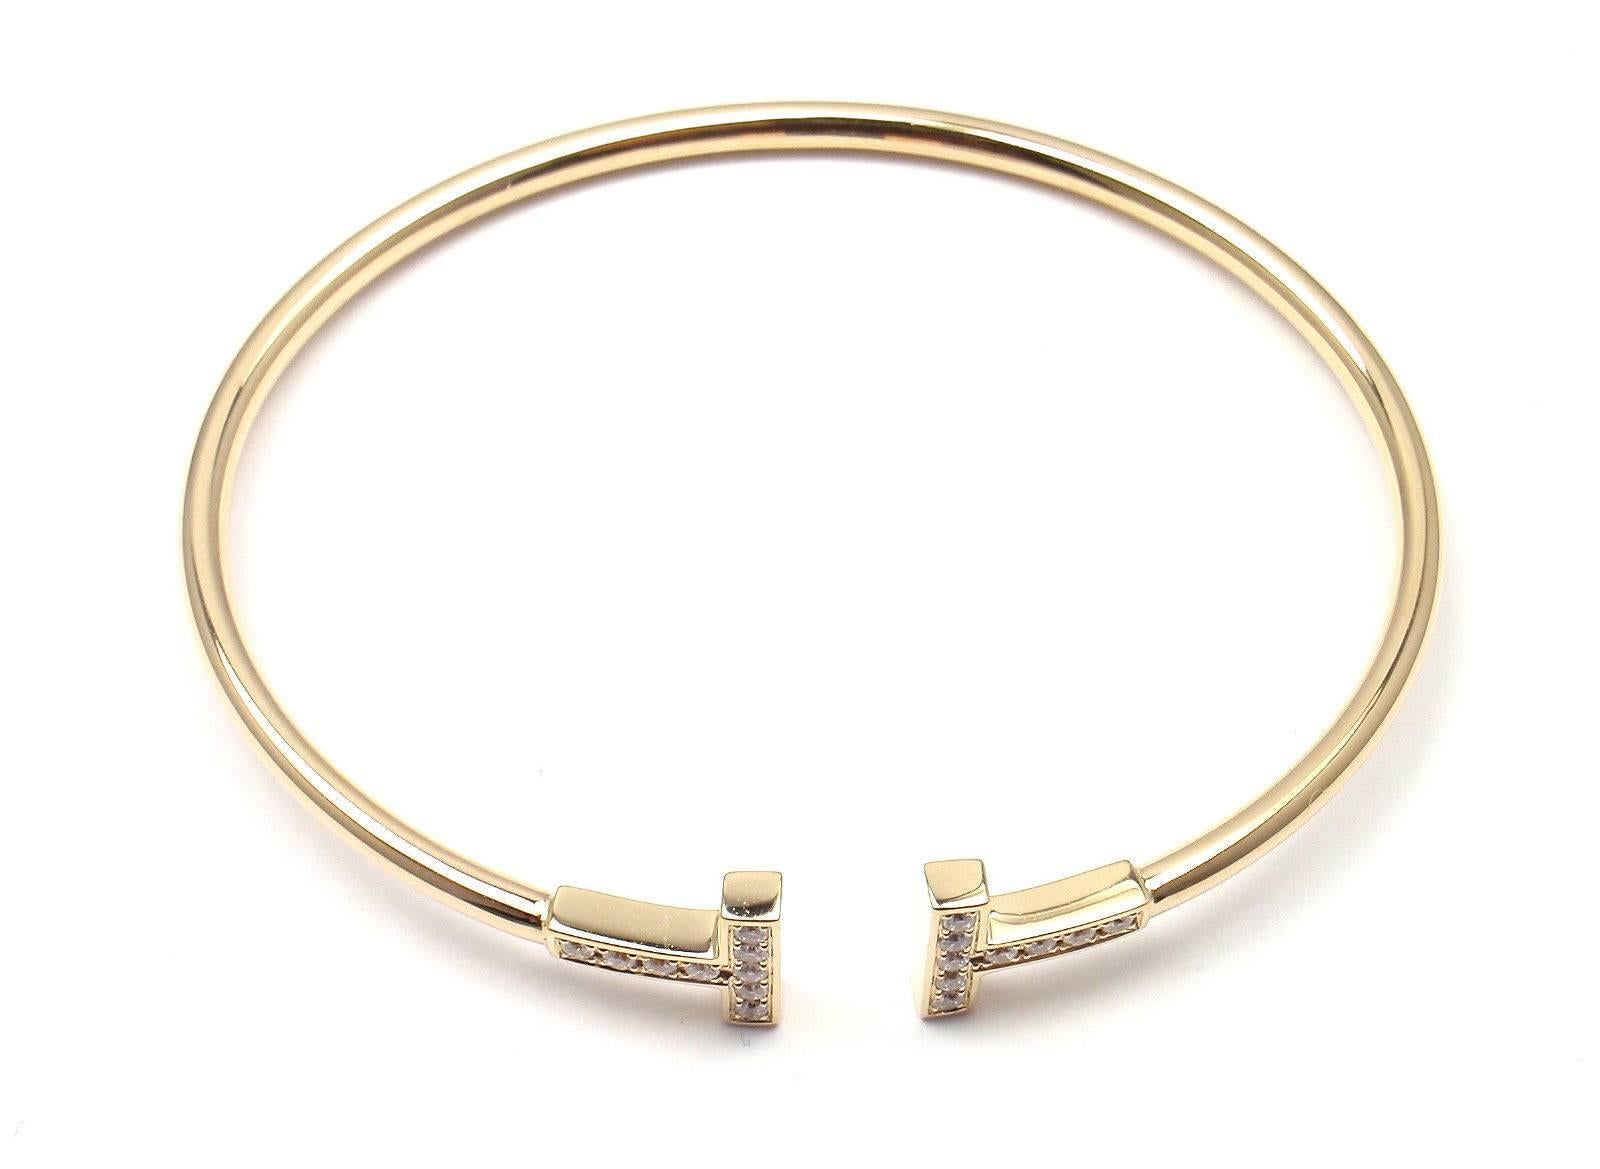 18k Yellow Gold Diamond Tiffany T Bangle Bracelet by Tiffany & Co. 
With 18 round brilliant cut diamonds VS1 clarity, E color total weight approx. .22ct

Details: 
Weight: 7.9 grams
Length: 6.25